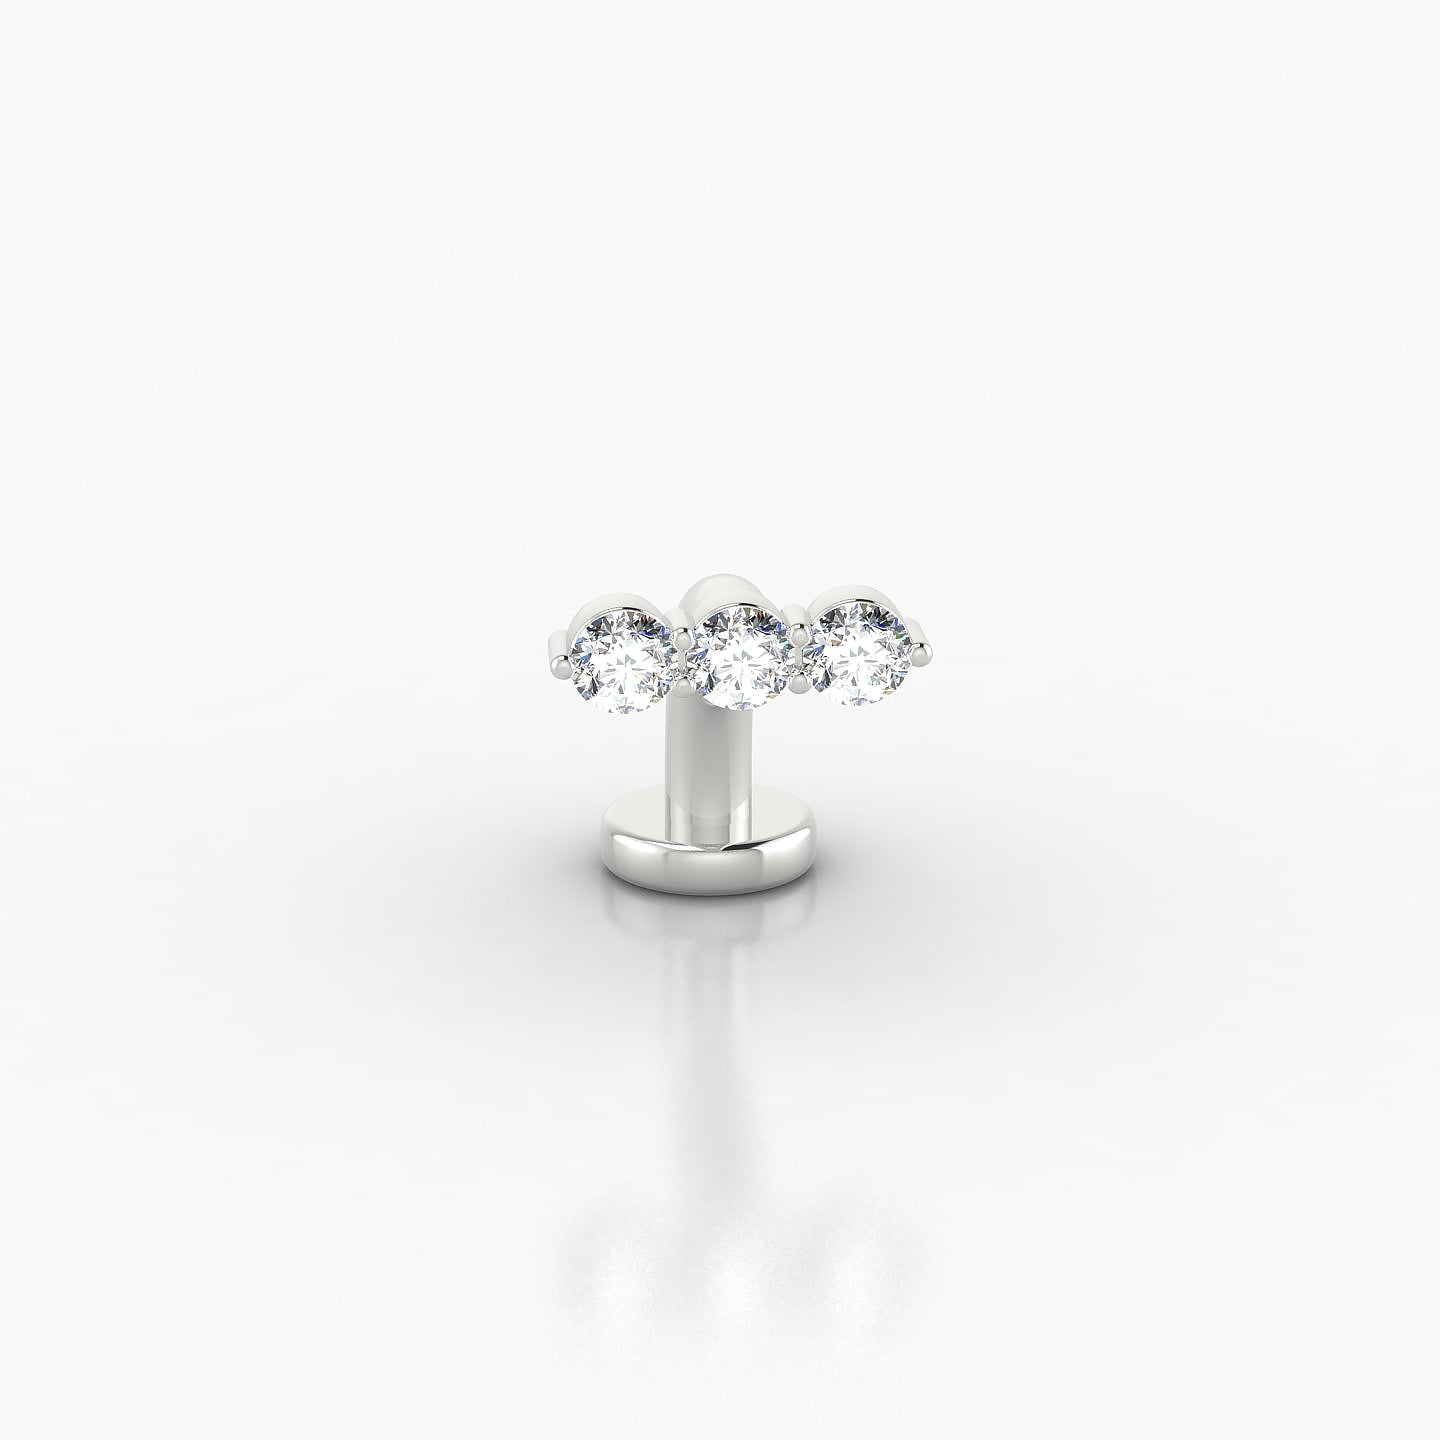 Ma'at | 18k White Gold 8 mm 7.5 mm Trilogy Diamond Floating Navel Piercing